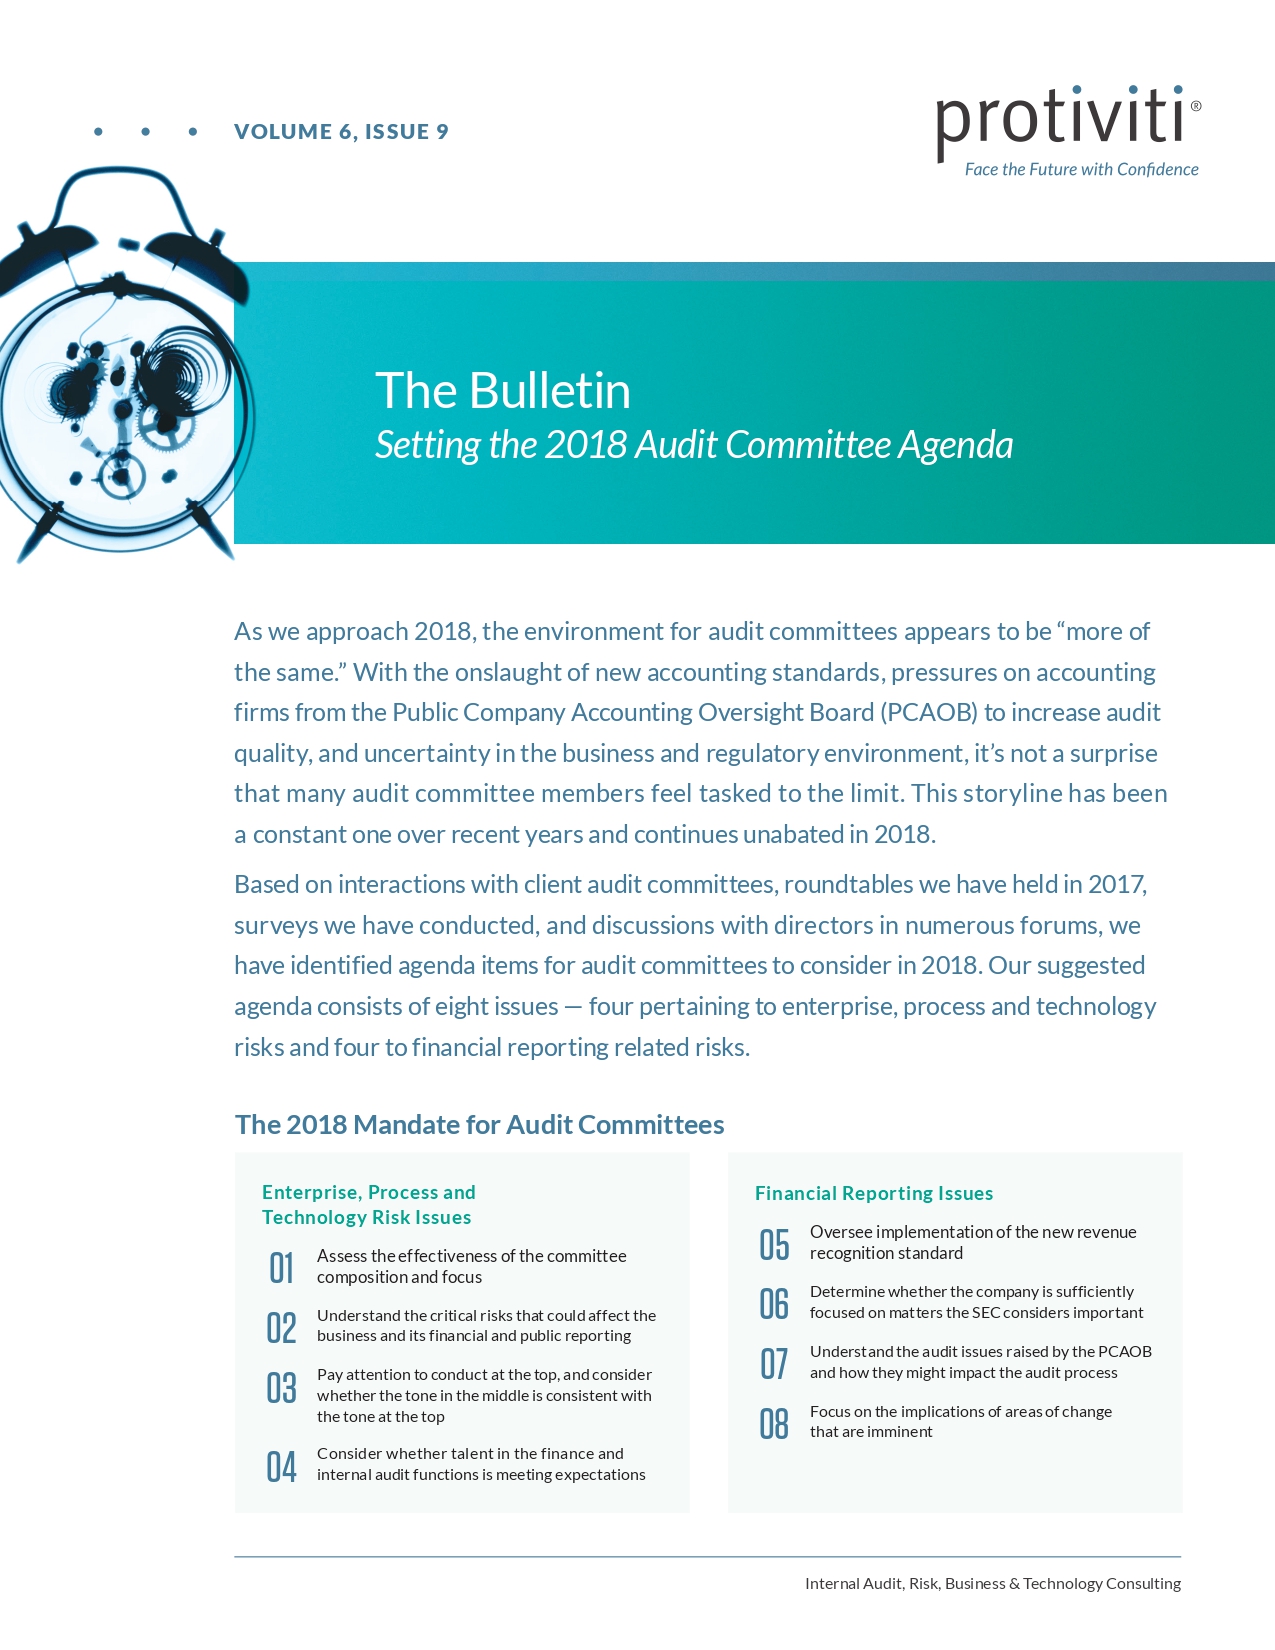 Screenshot of the first page of Setting the 2018 Audit Committee Agenda